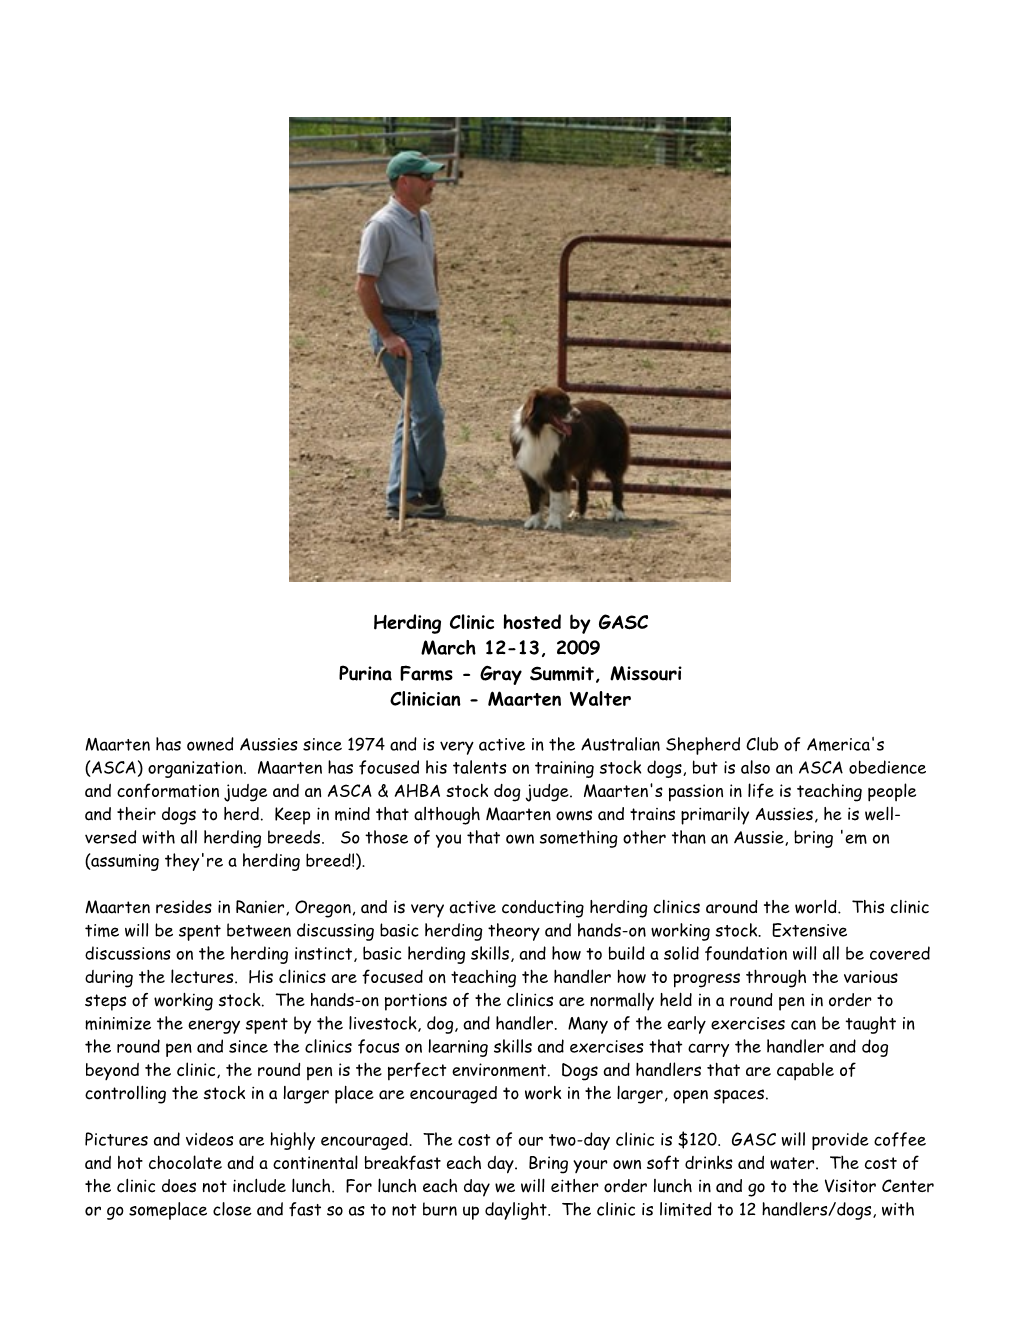 Herding Clinic Hosted by GASC